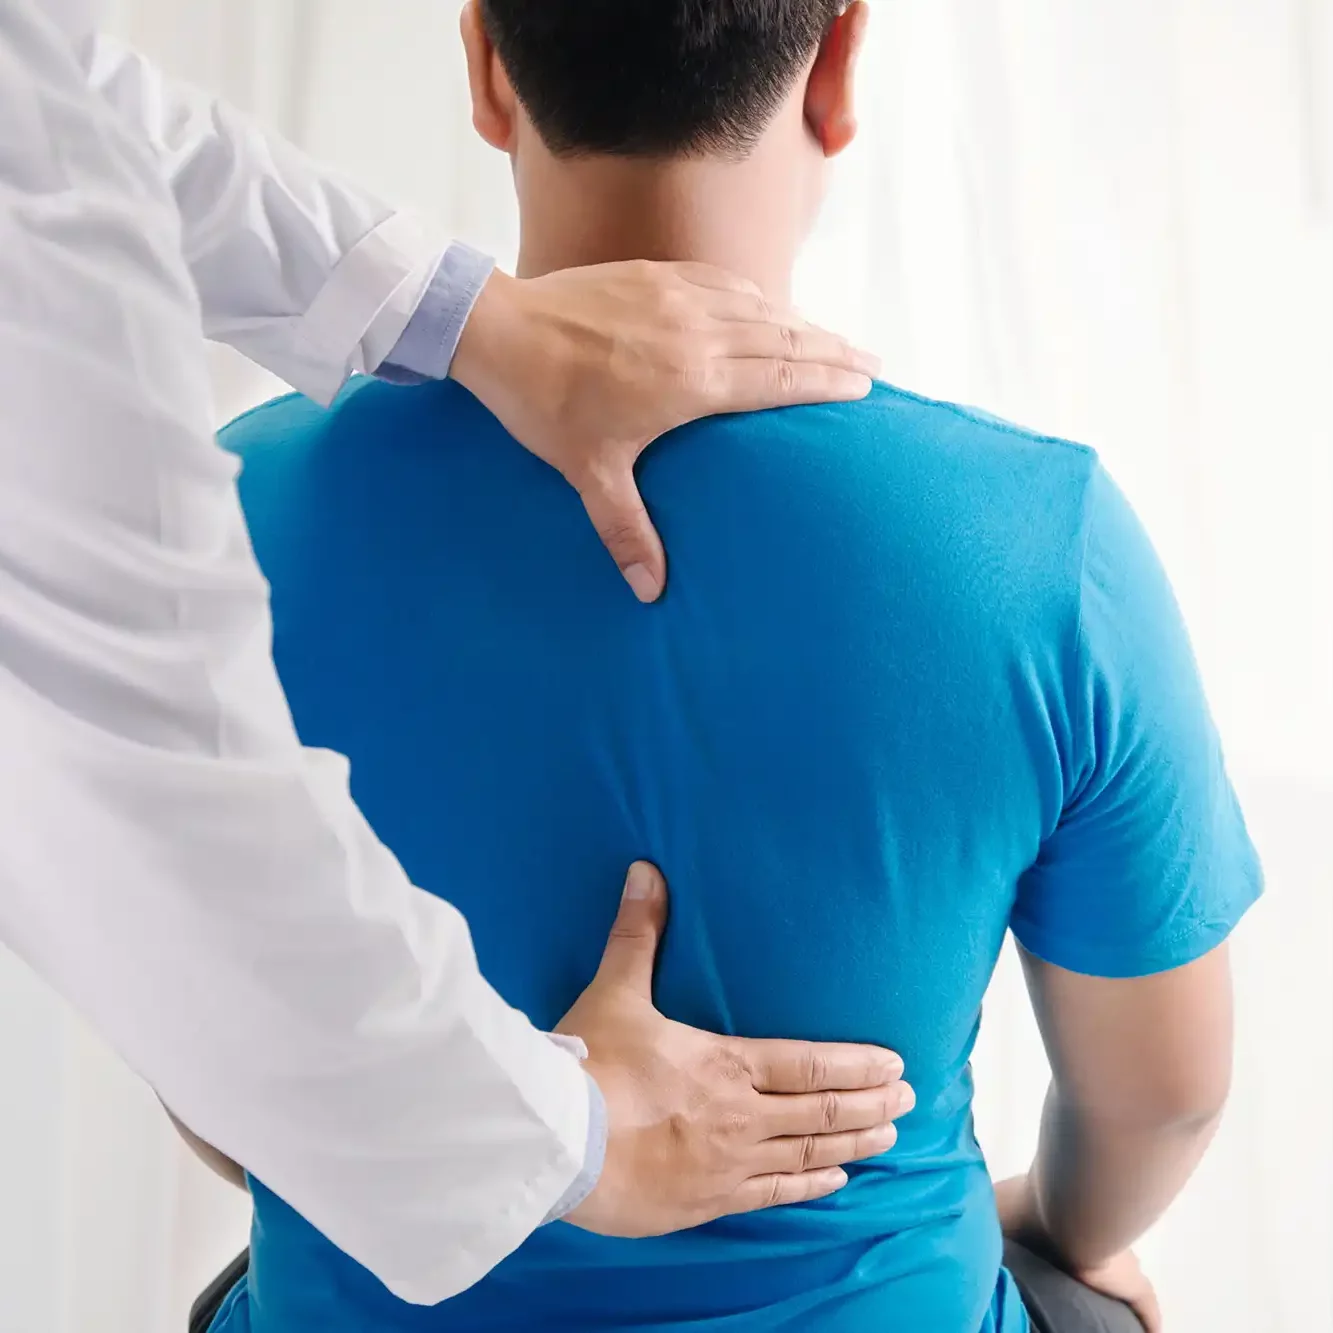 Chiropractor hands on back